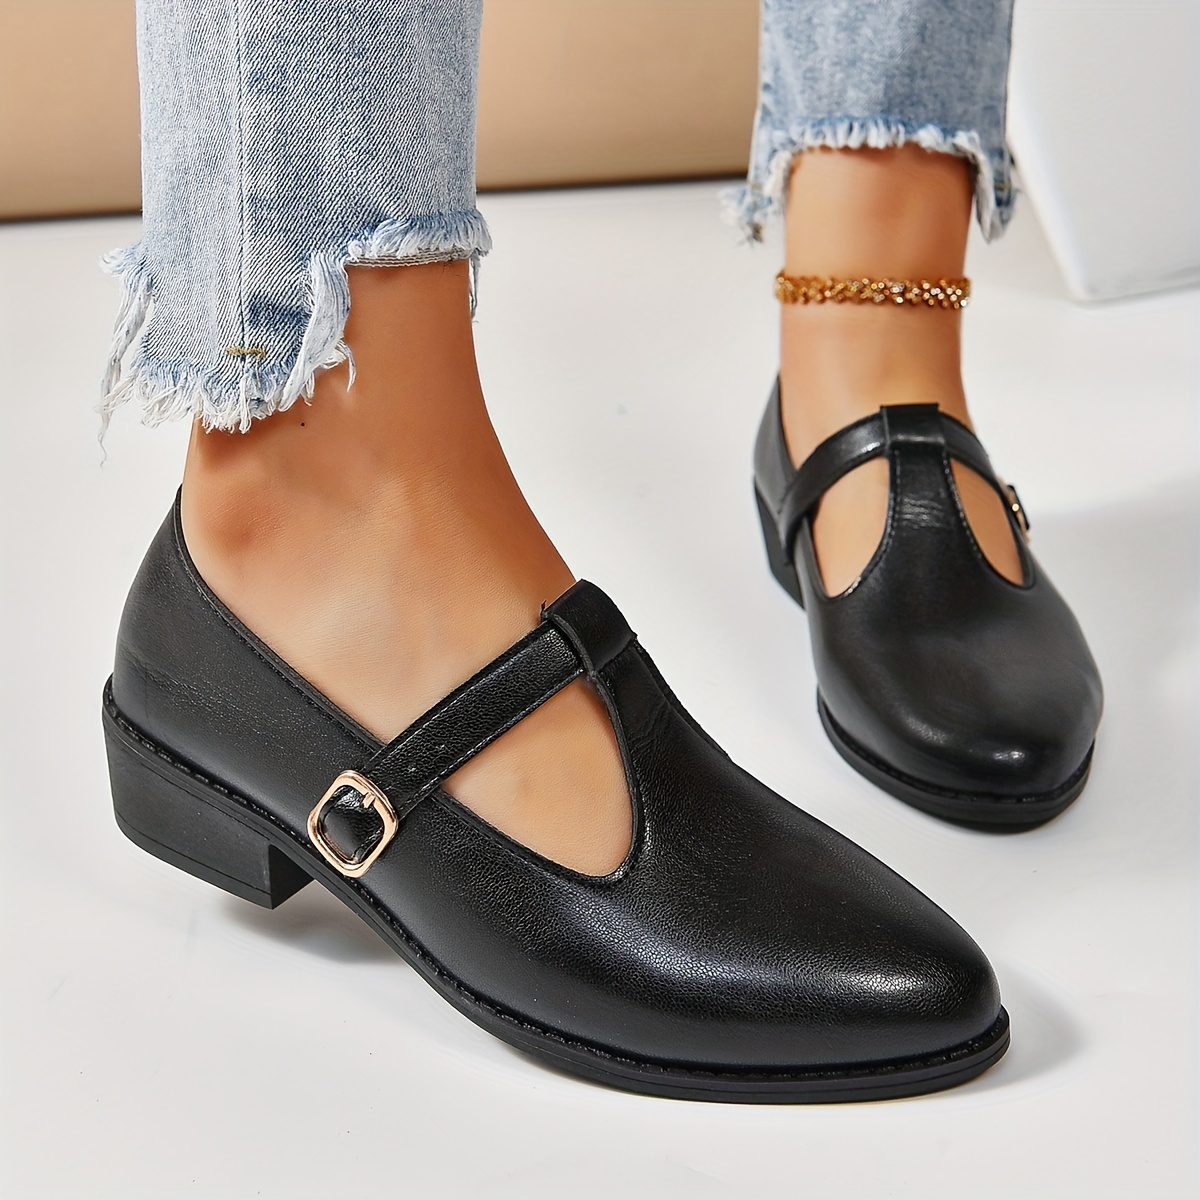 

Women's Solid Color Chunky Heel Loafers, Fashion Point Toe Cutout Design Shoes, Comfortable Buckle Strap Shoes